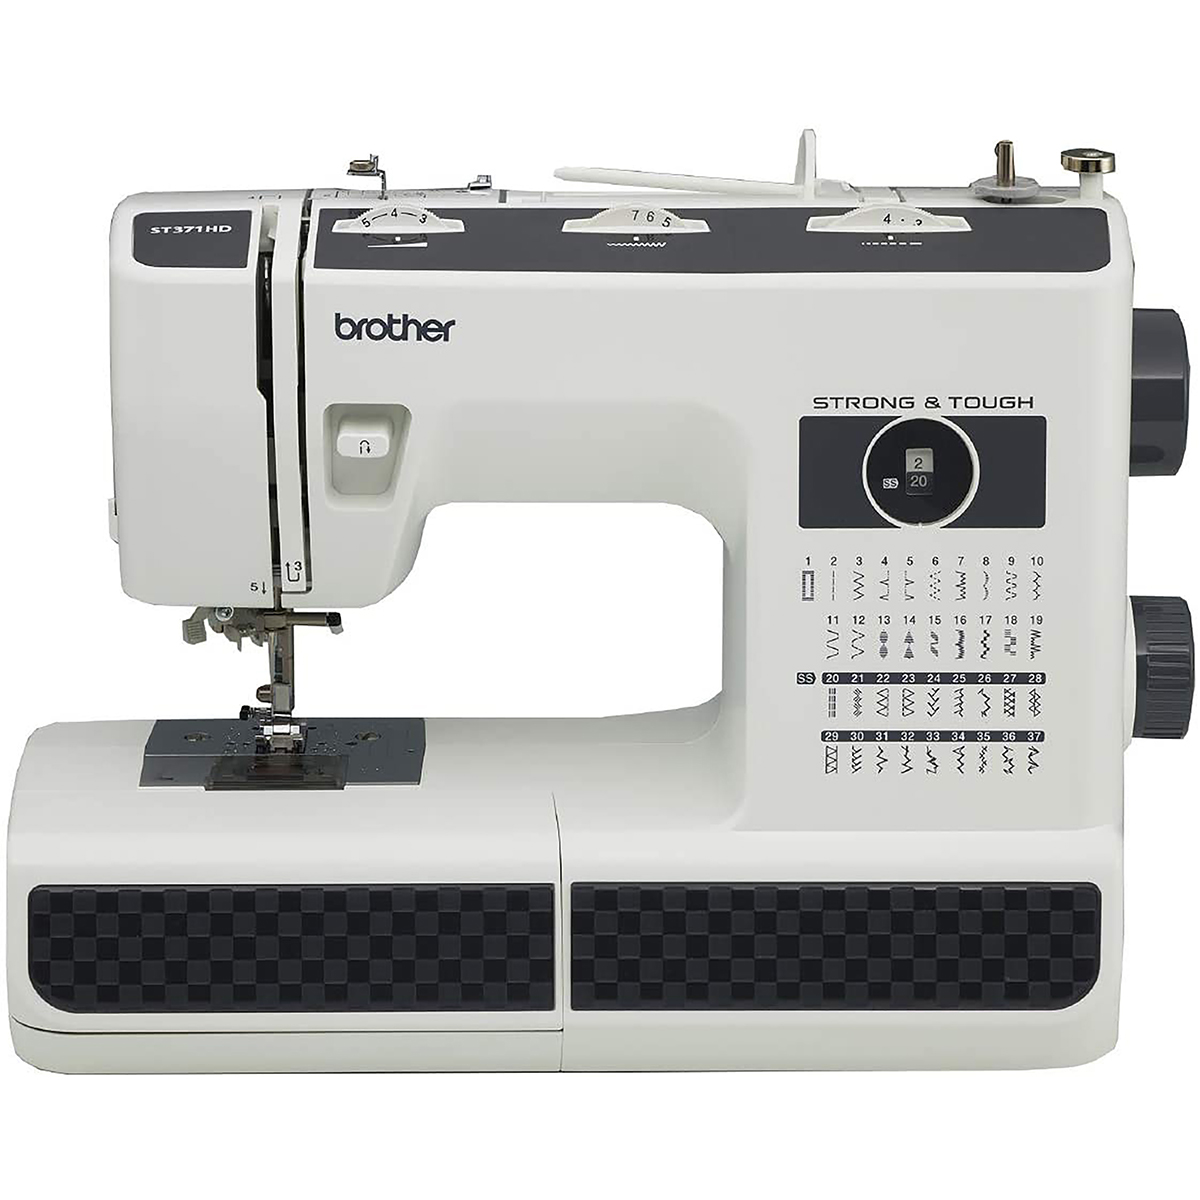 Brother ST371HD Strong And Tough Sewing Machine